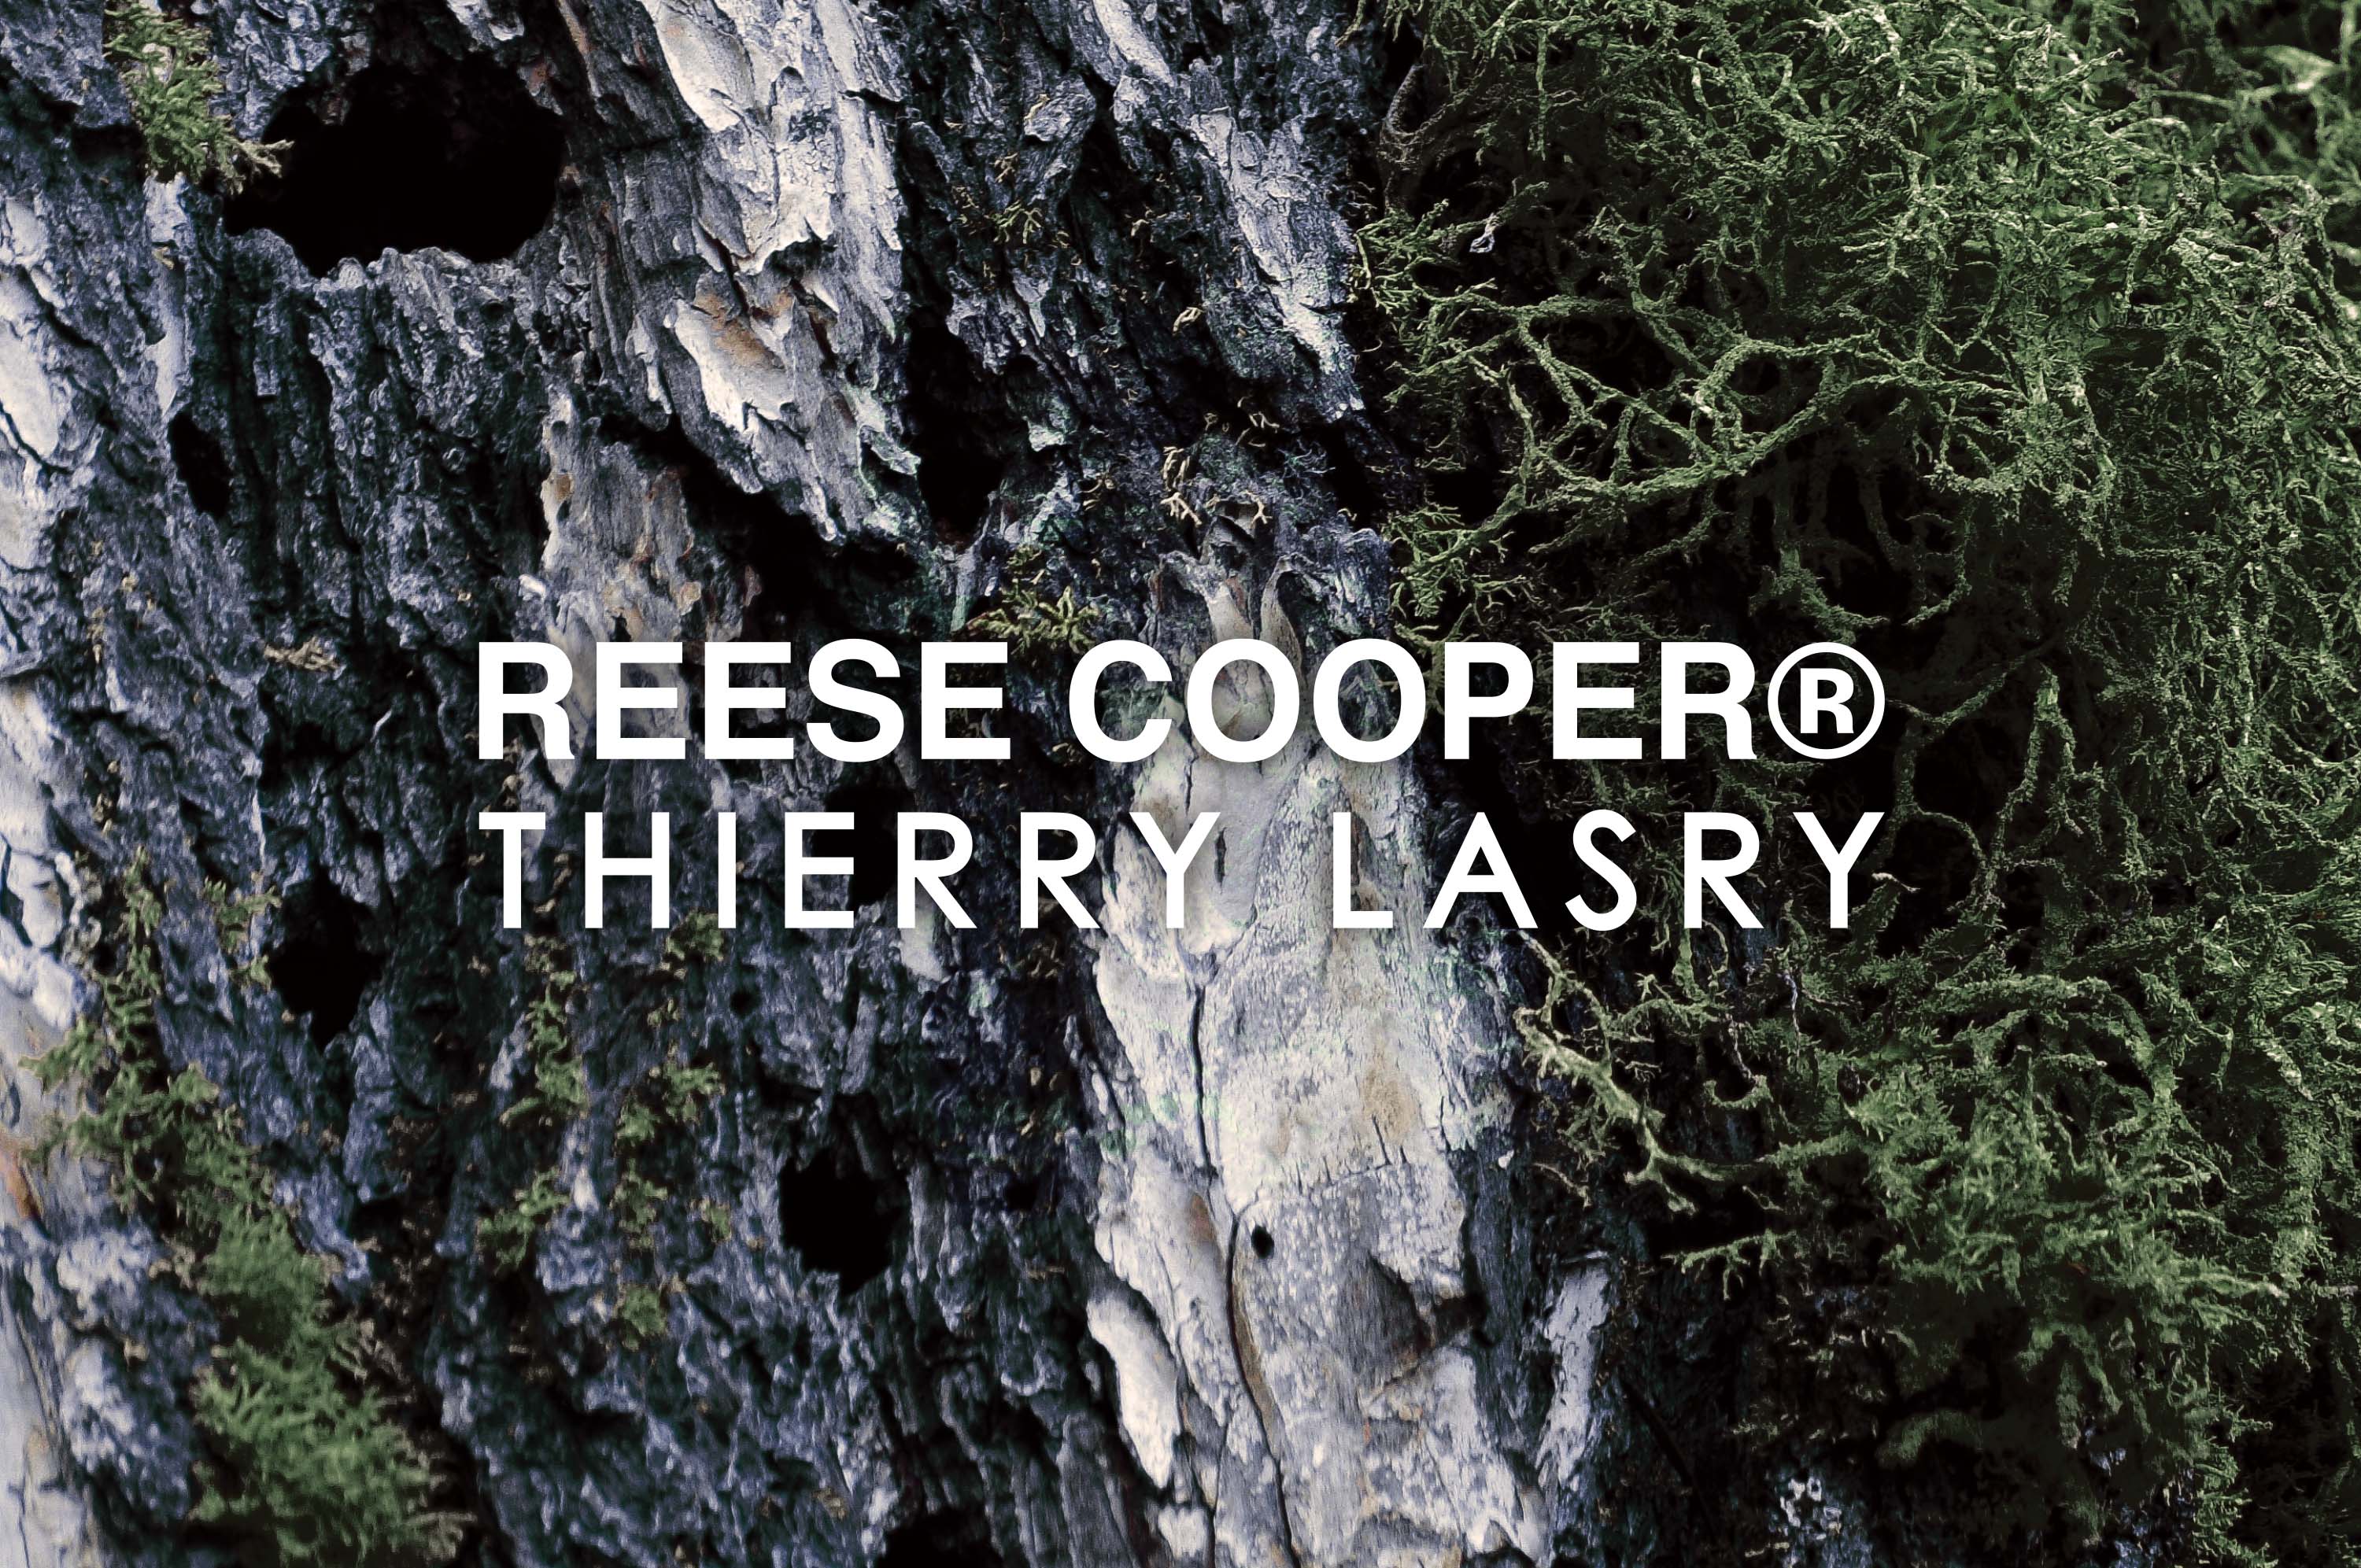 THIERRY LASRY for REESE COOPER